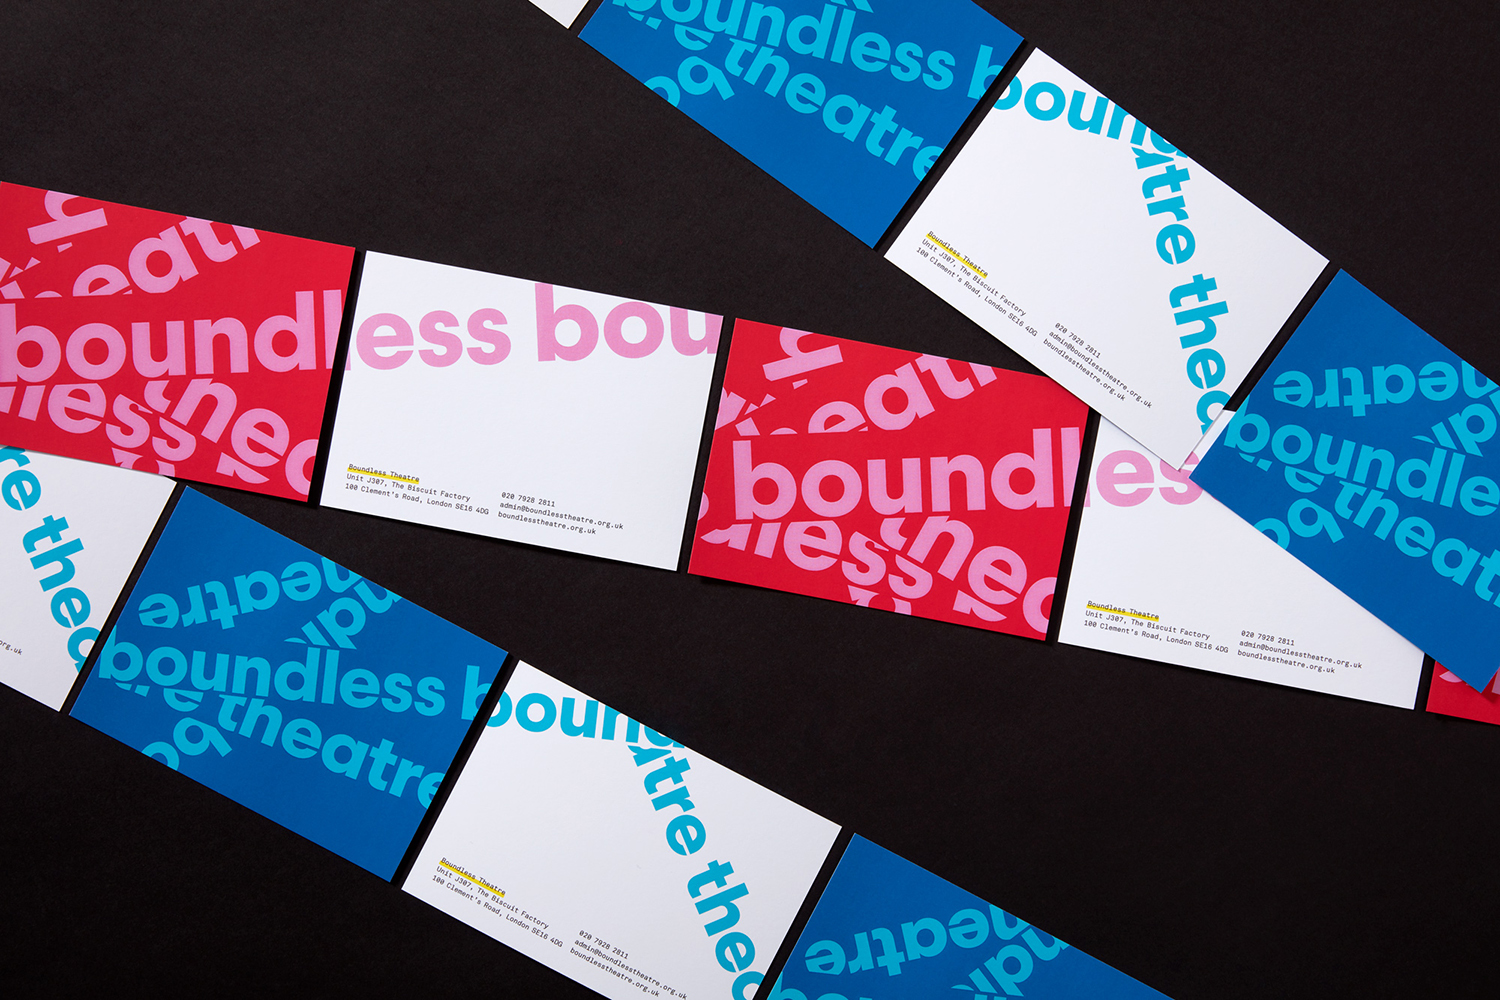 Logotype, posters, programme, business cards and website by London based studio Spy for Boundless Theatre